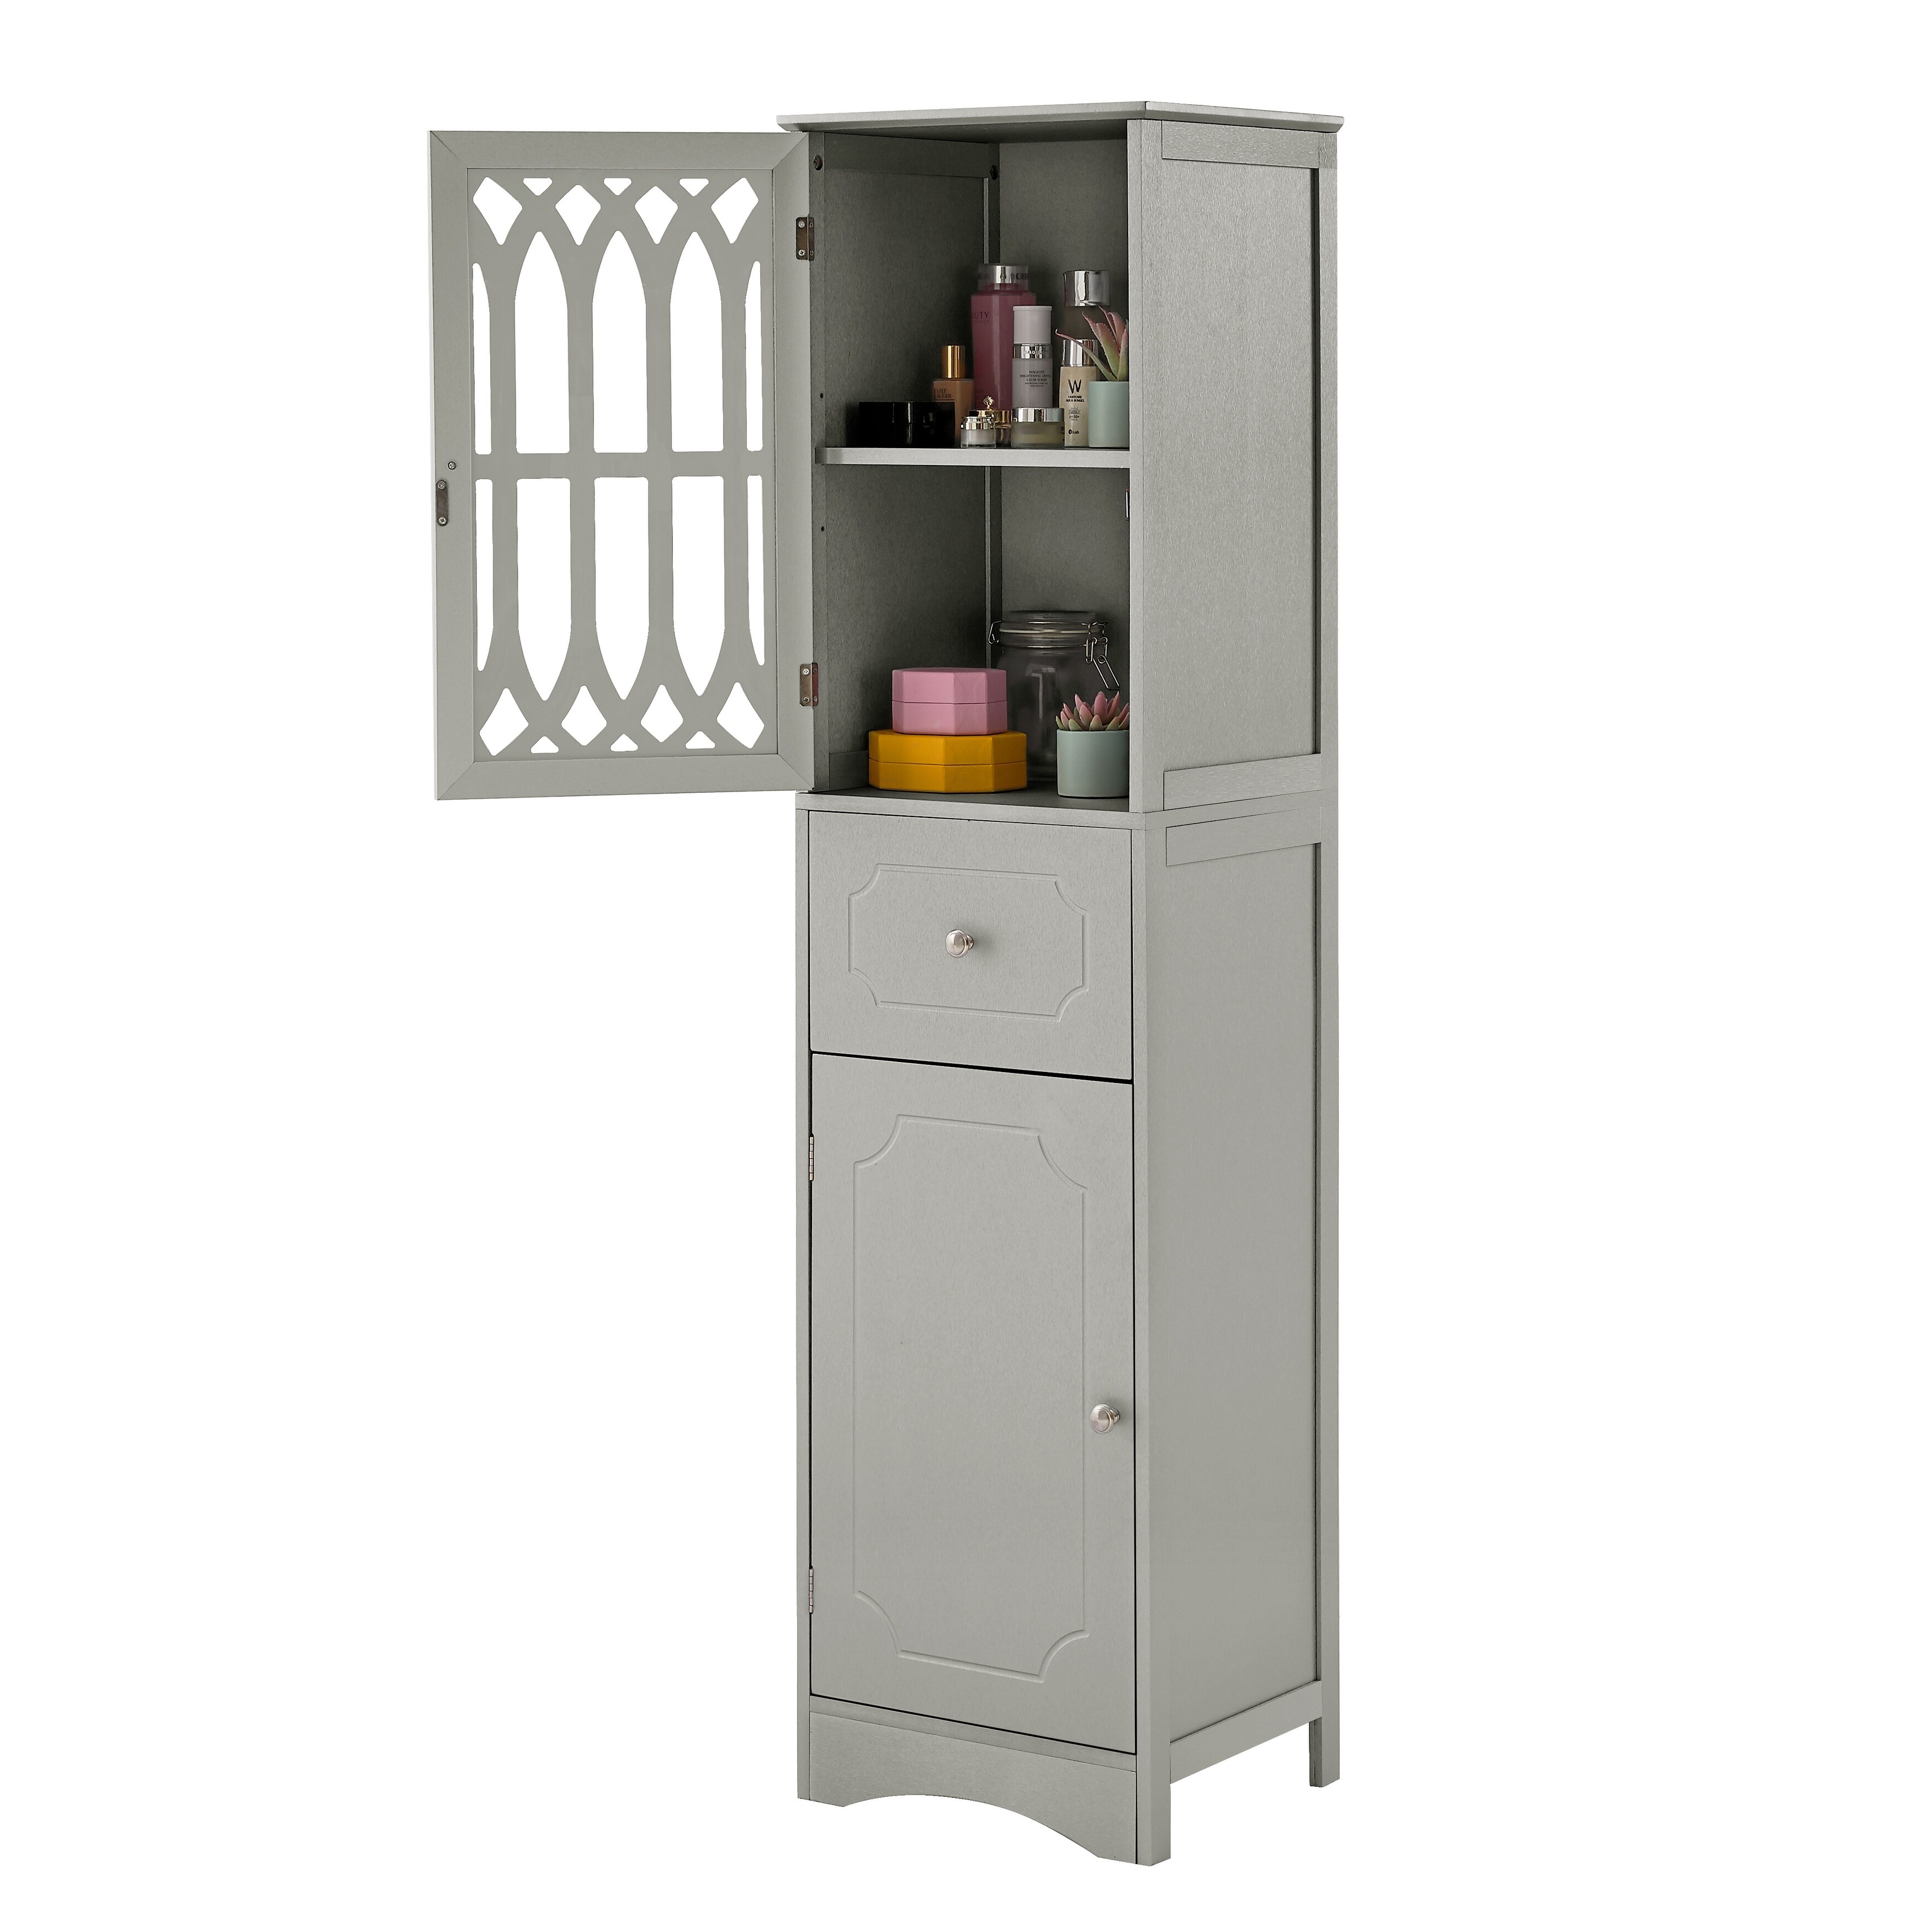 https://ak1.ostkcdn.com/images/products/is/images/direct/8474dde3ebcd9903b6814d4da81101fac726355c/Tall-Bathroom-Cabinet%2C-Freestanding-Storage-Cabinet-with-Drawer-and-Doors%2C-MDF-Board%2C-Adjustable-Shelf.jpg